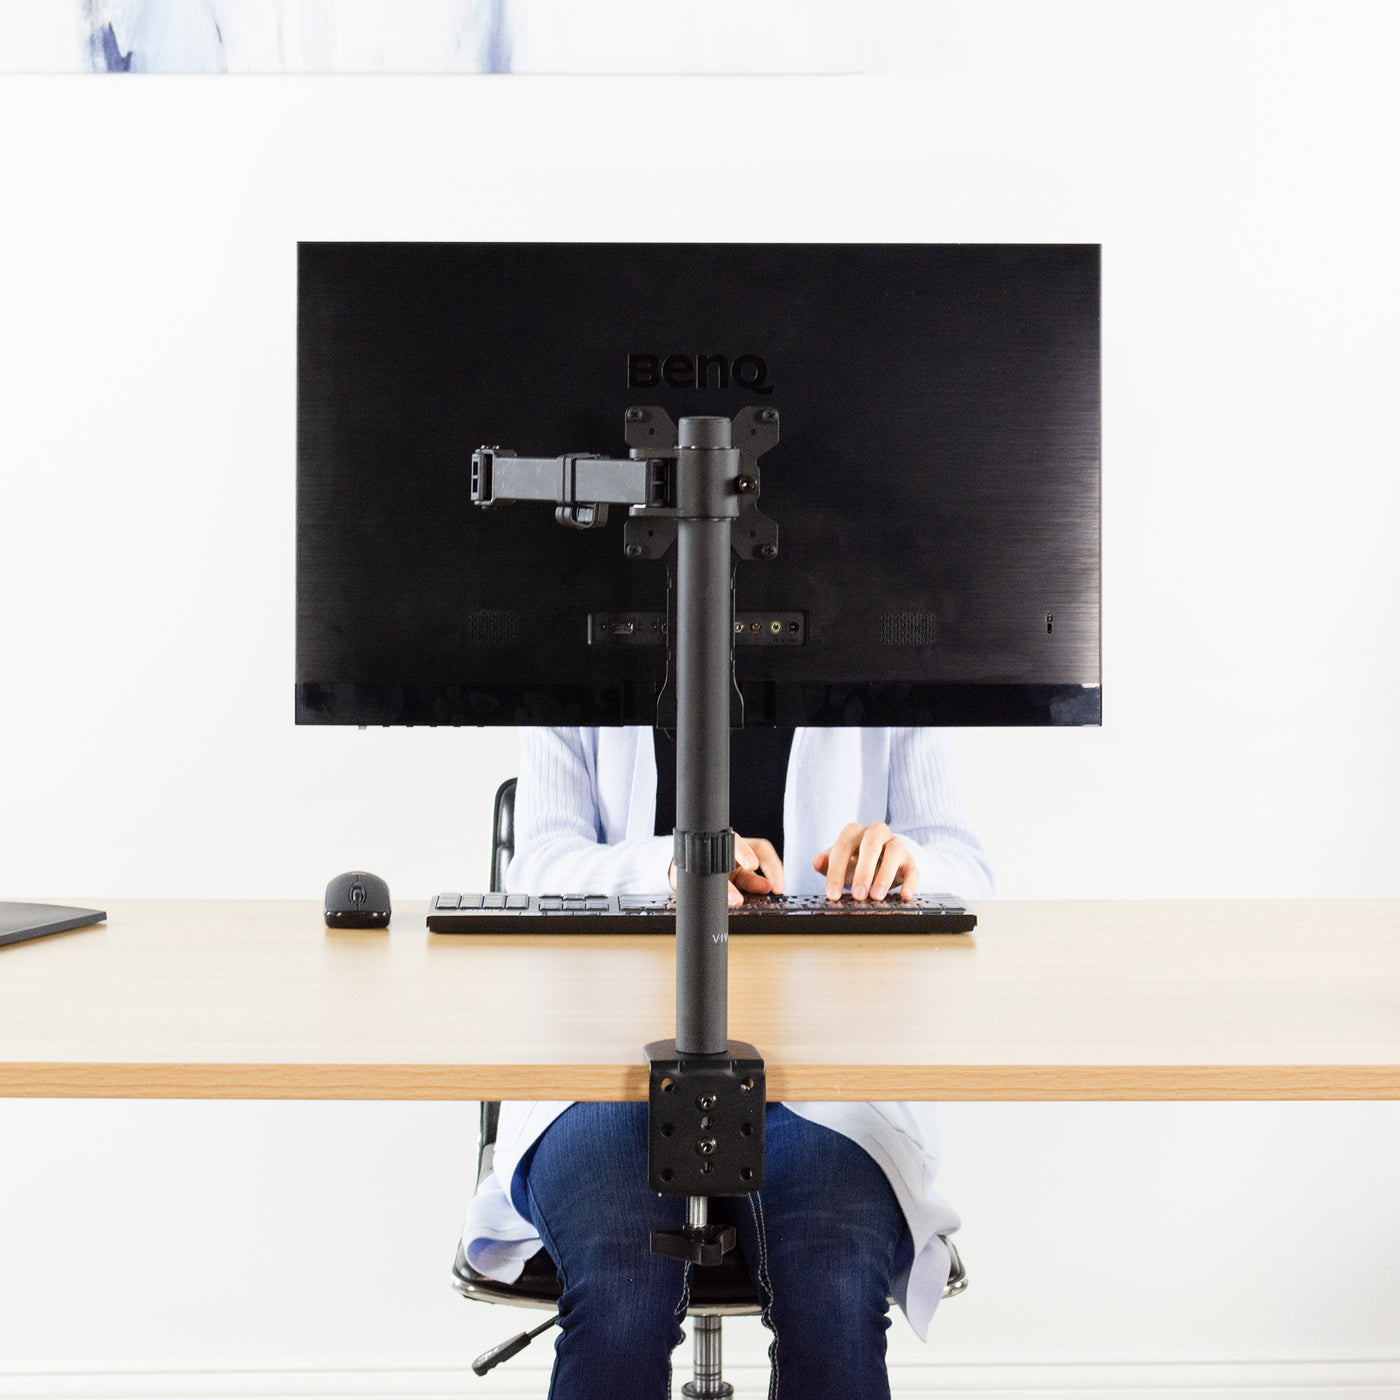 Securely support your large monitor above your desk to reduce neck strain.